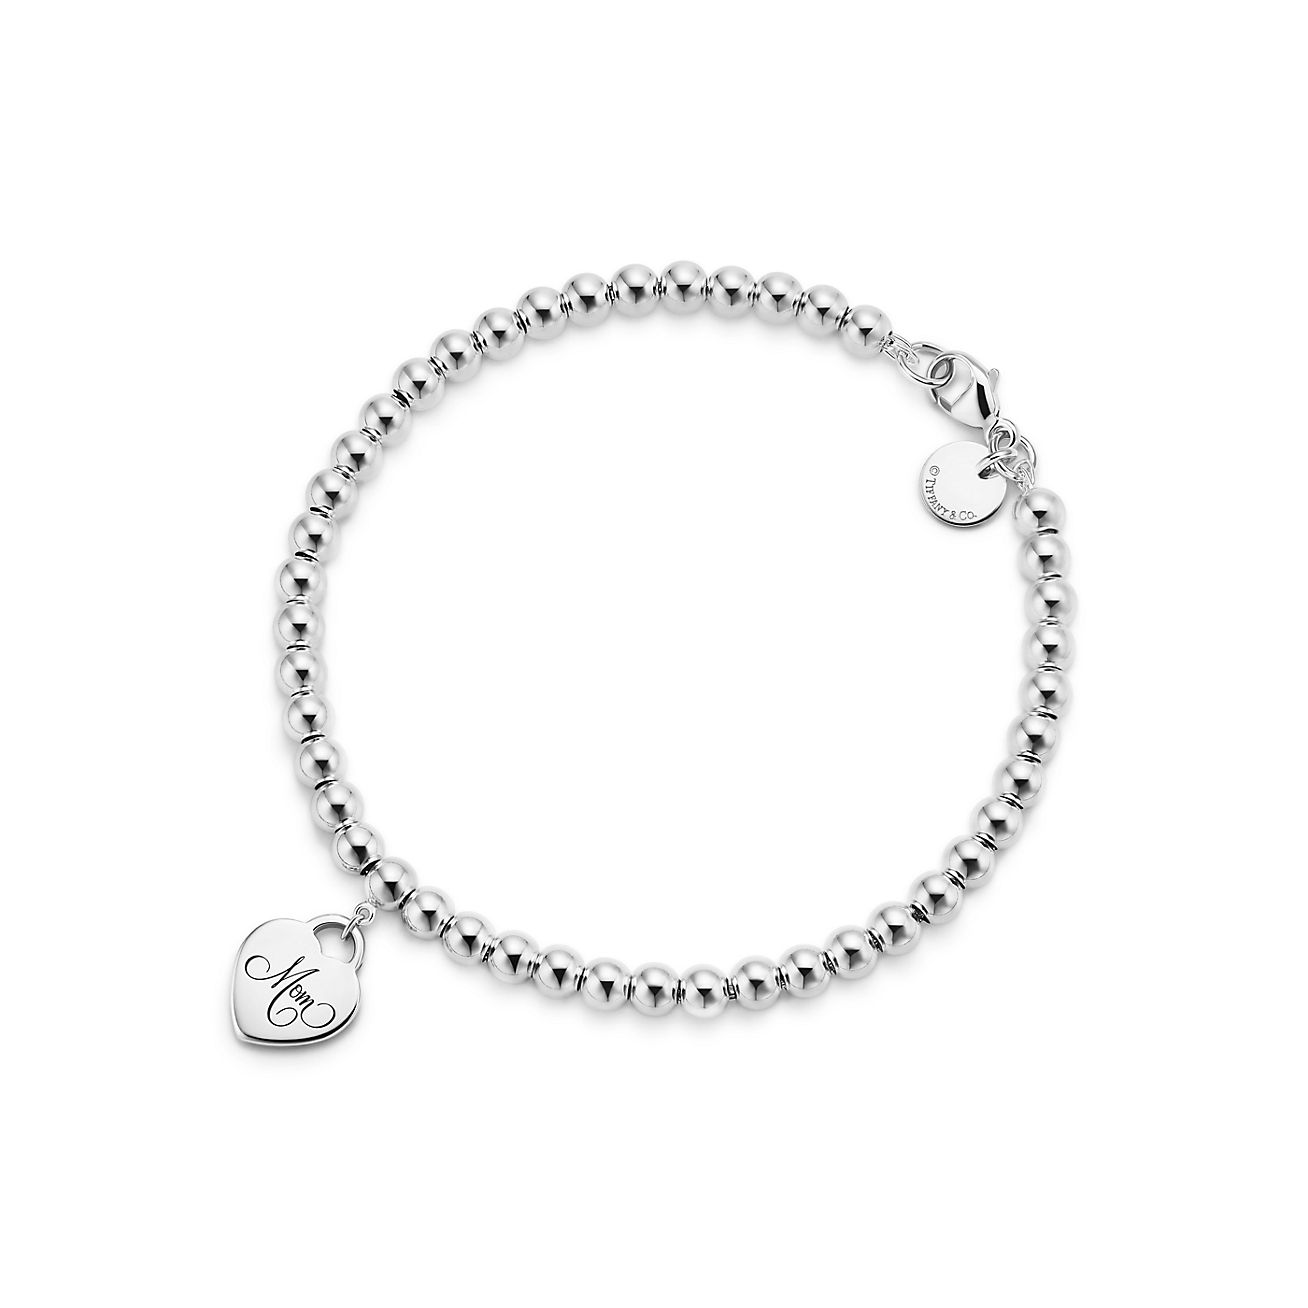 Buy SOLINFOR Mother Daughter Bracelet  Sterling Silver Jewelry with Gift  Wrapping Card  Gifts for Mom Daughter Birthday Mothers Day  Two  Interlocking Hearts Bracelet for Women at Amazonin